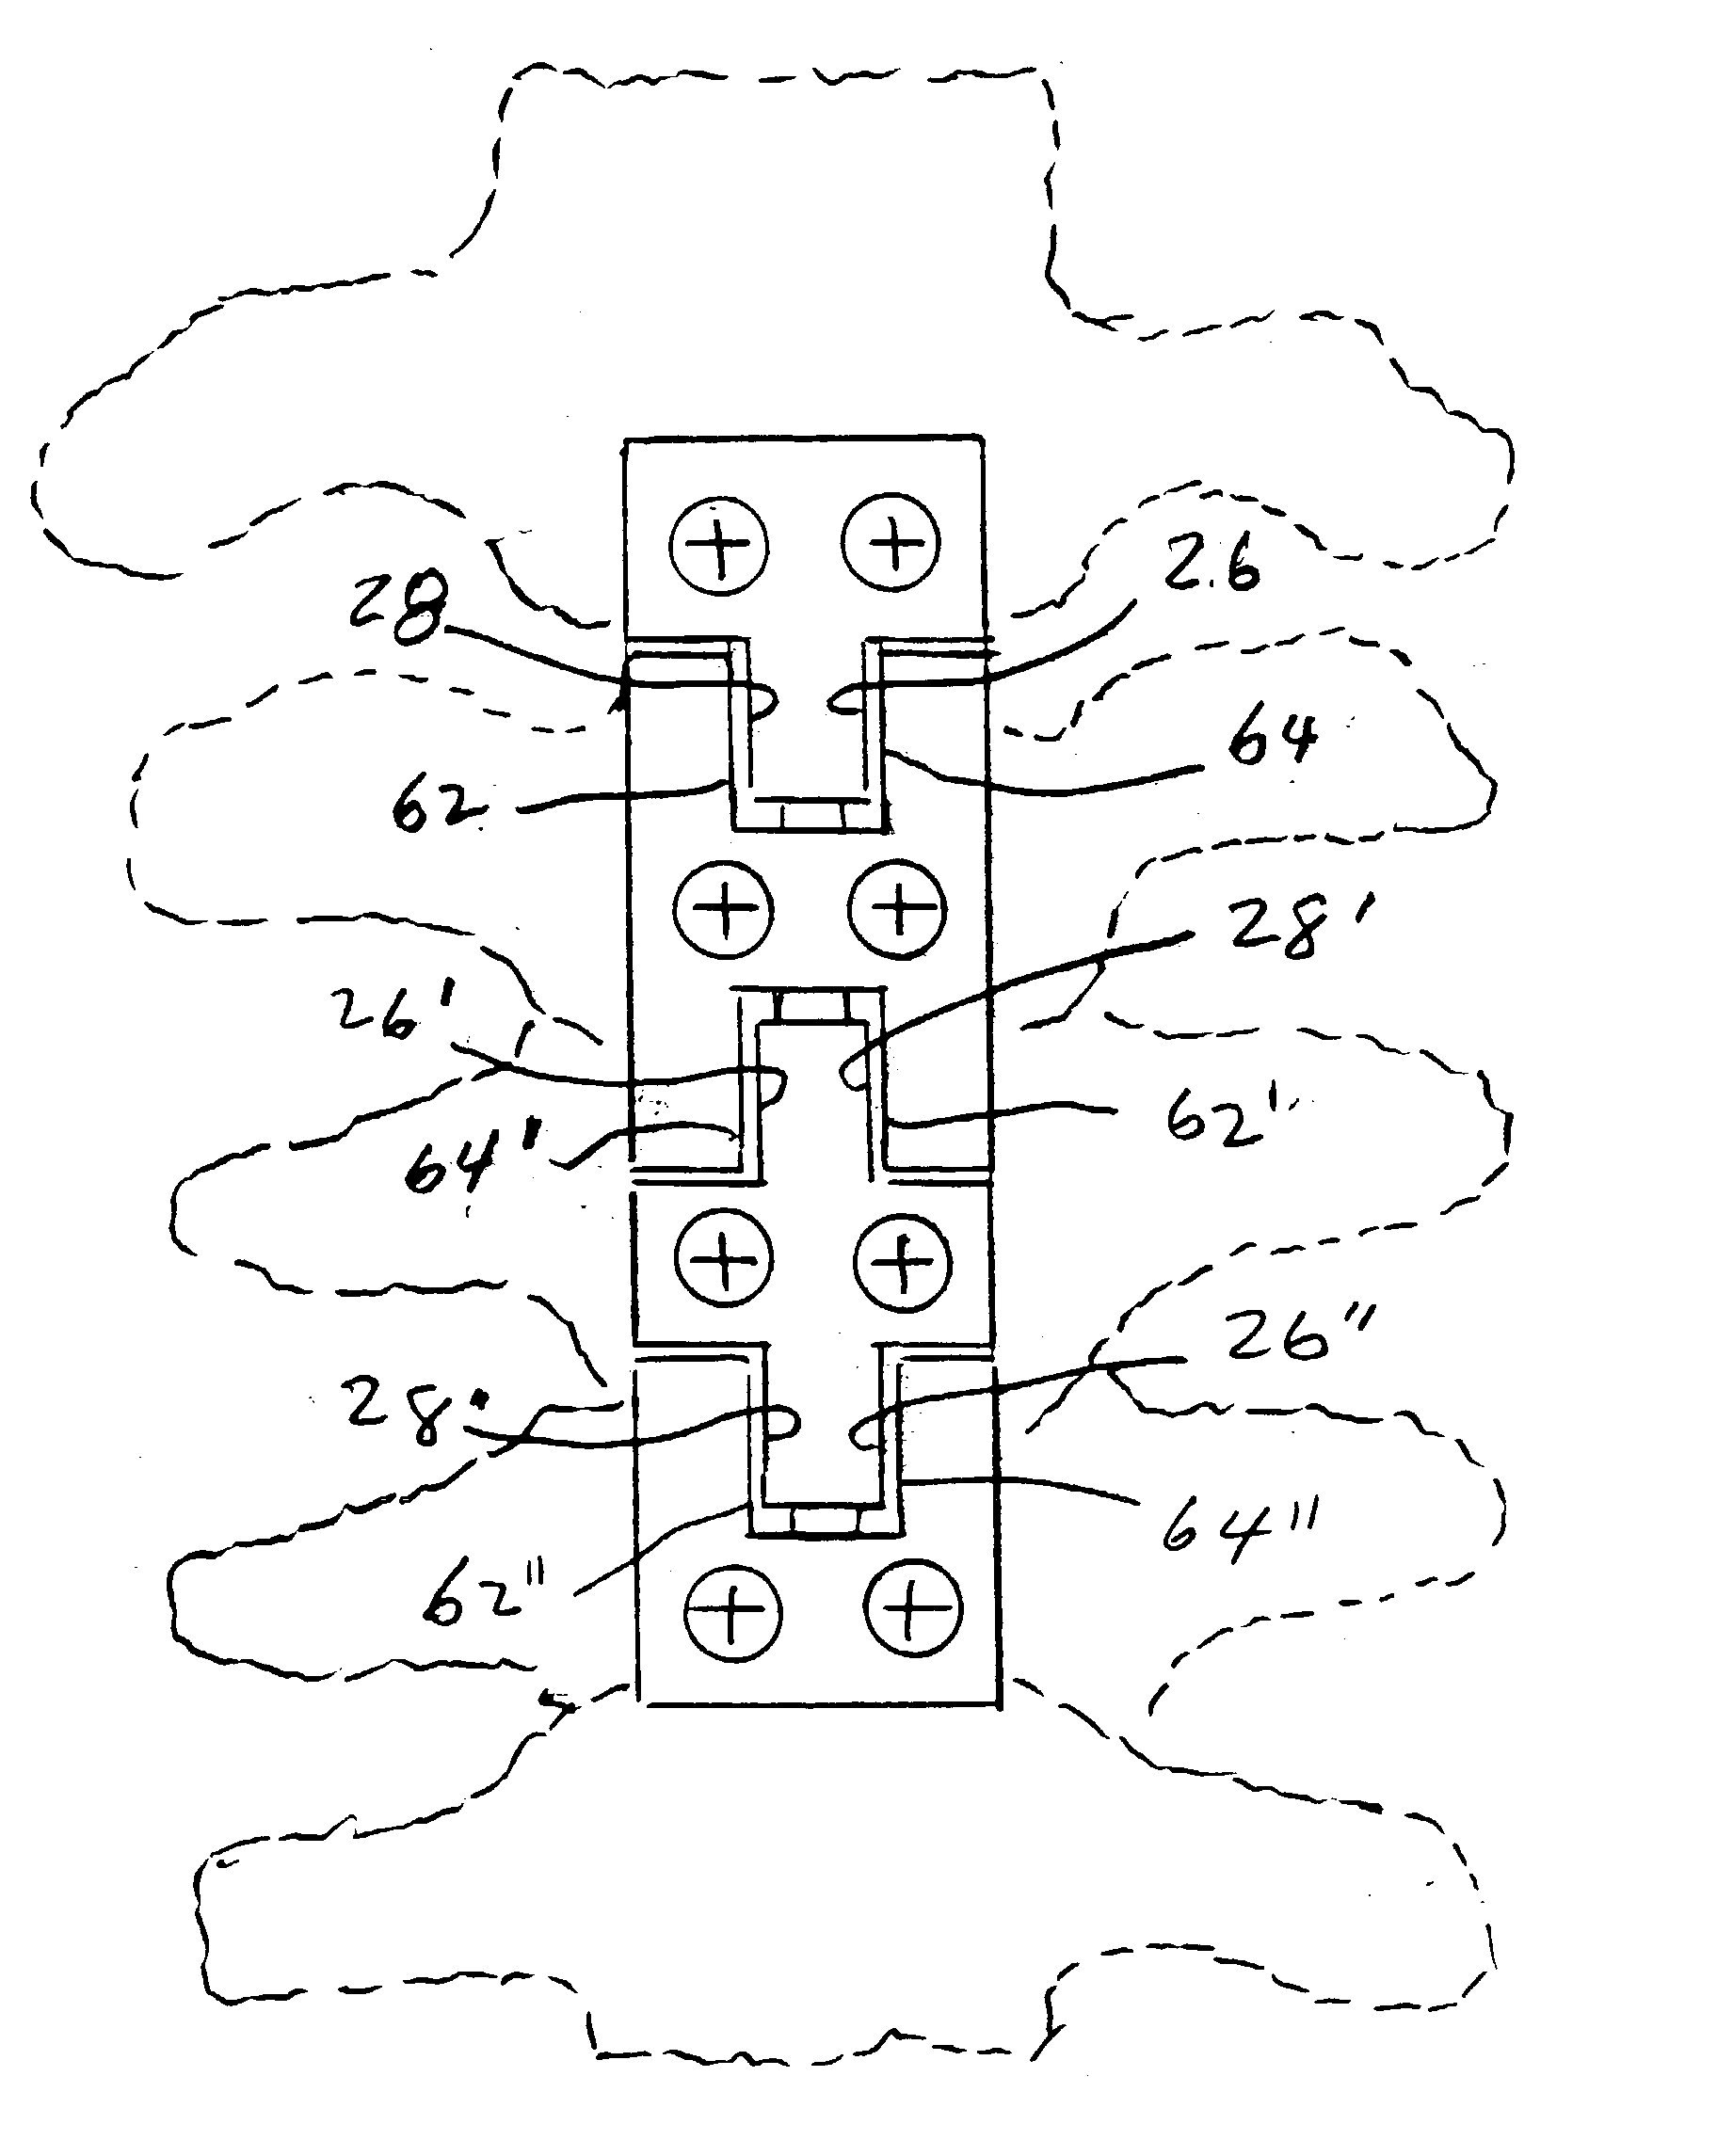 Methods and apparatuses for promoting fusion of vertebrae